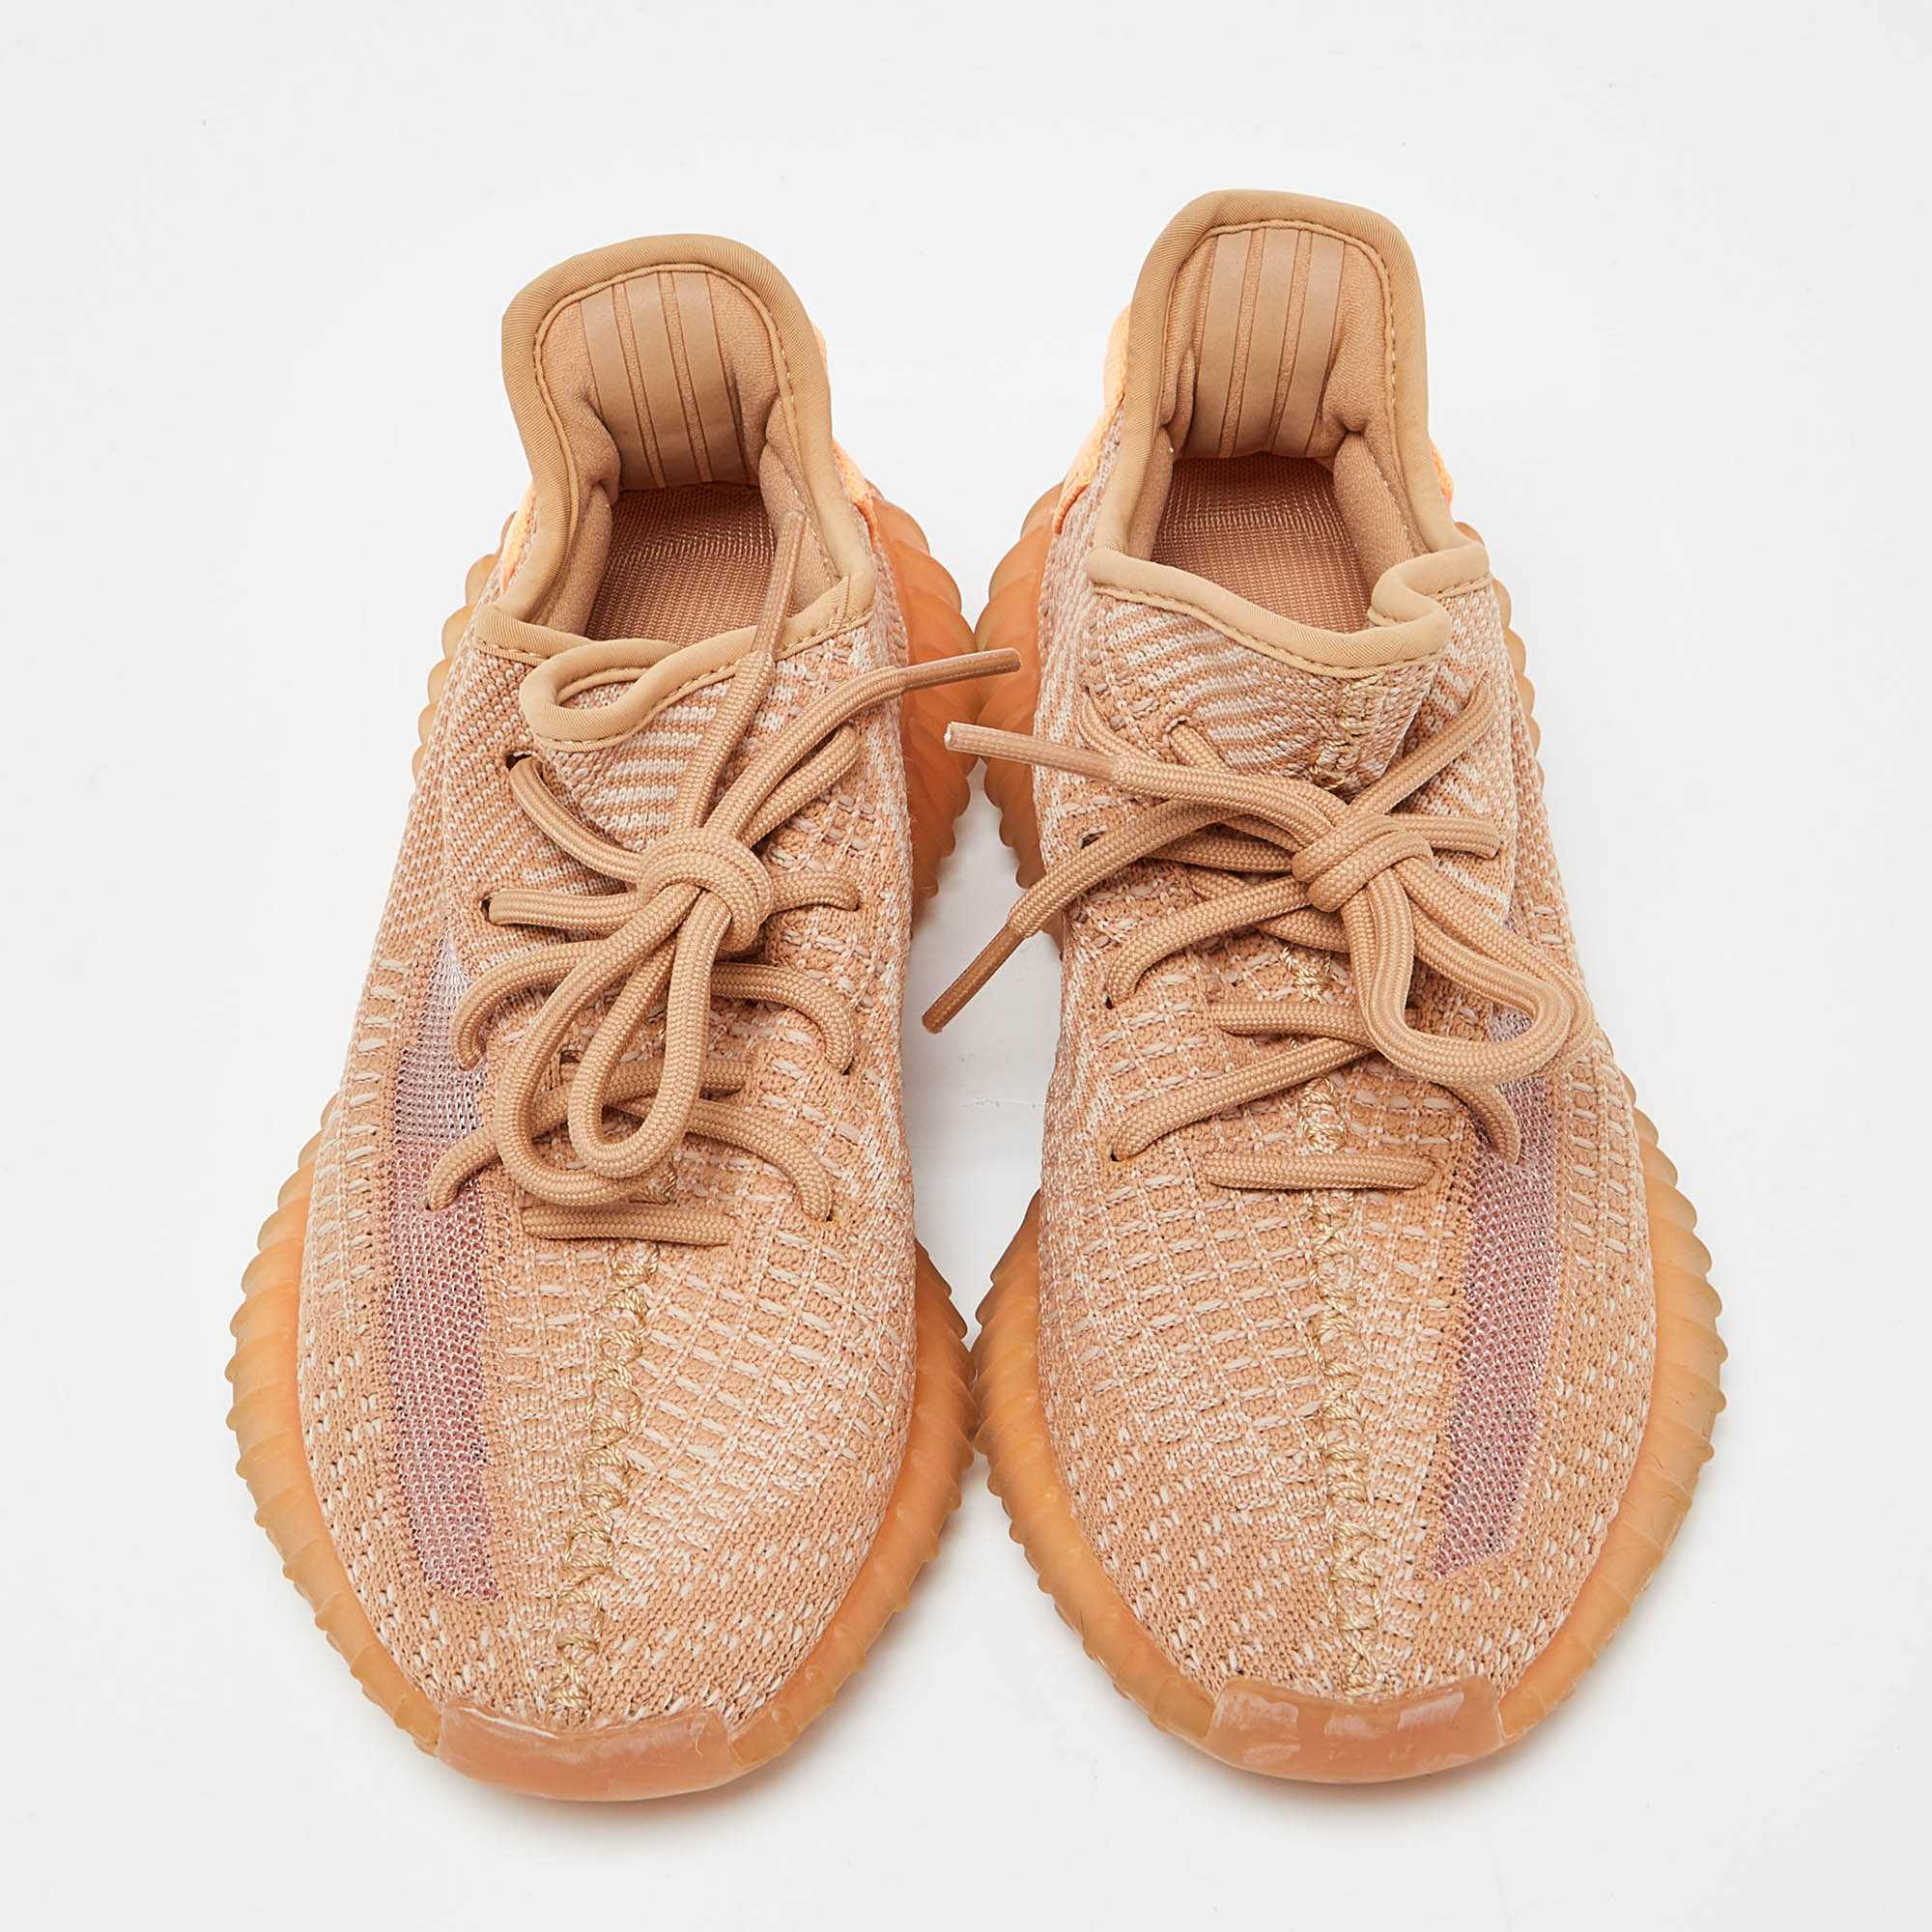 Yeezy X Adidas Orange Knit Fabric Boost 350 V2 Clay Sneakers Size 36 2/3